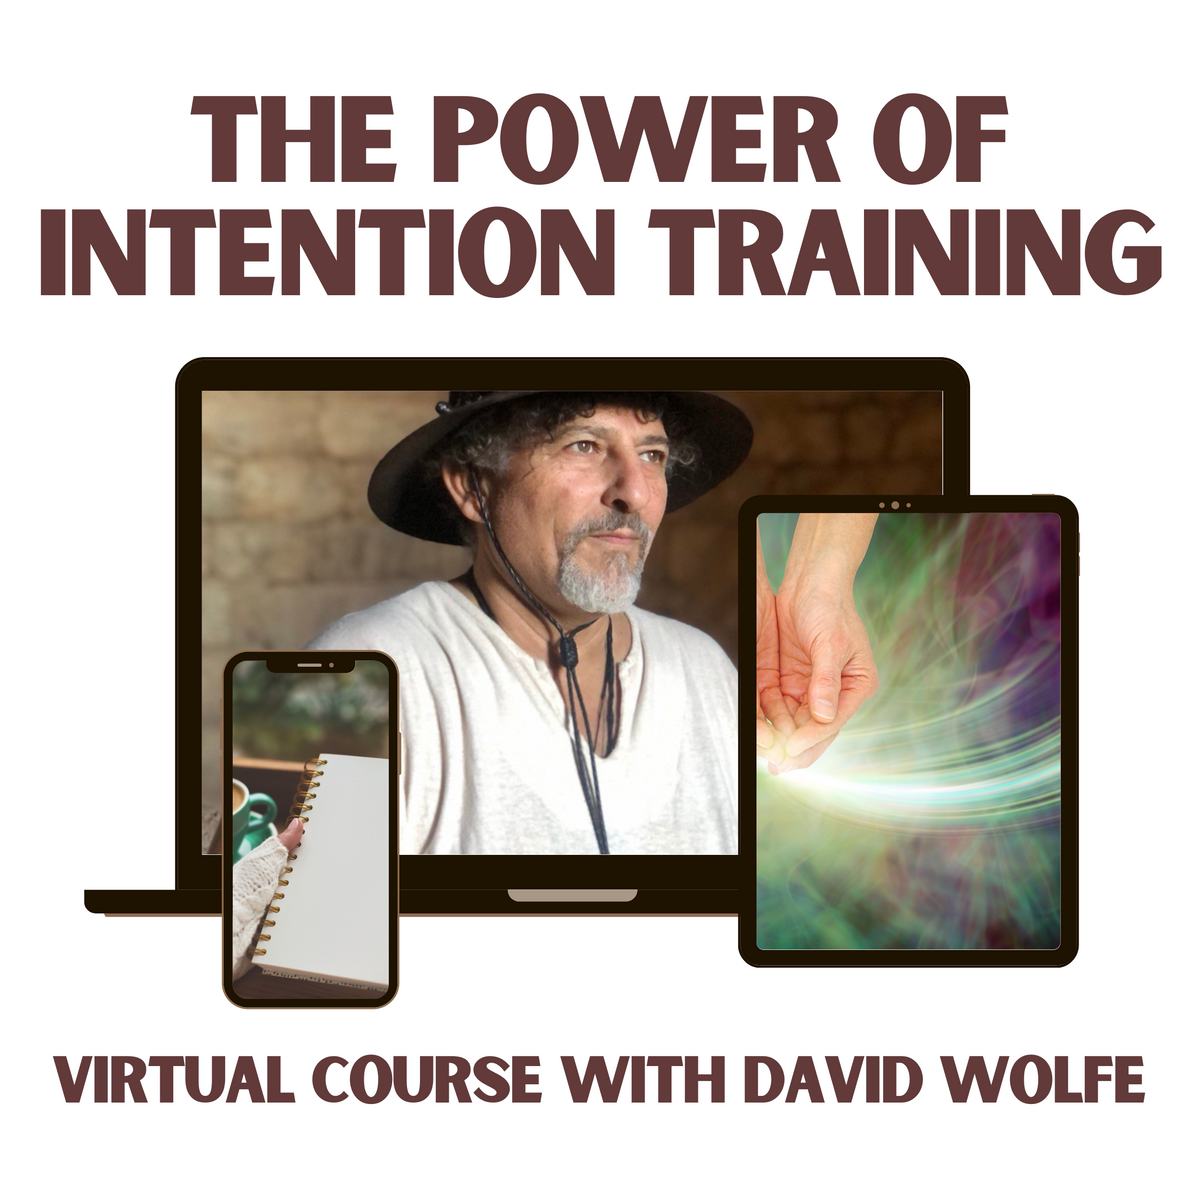 The Power of Intention Training